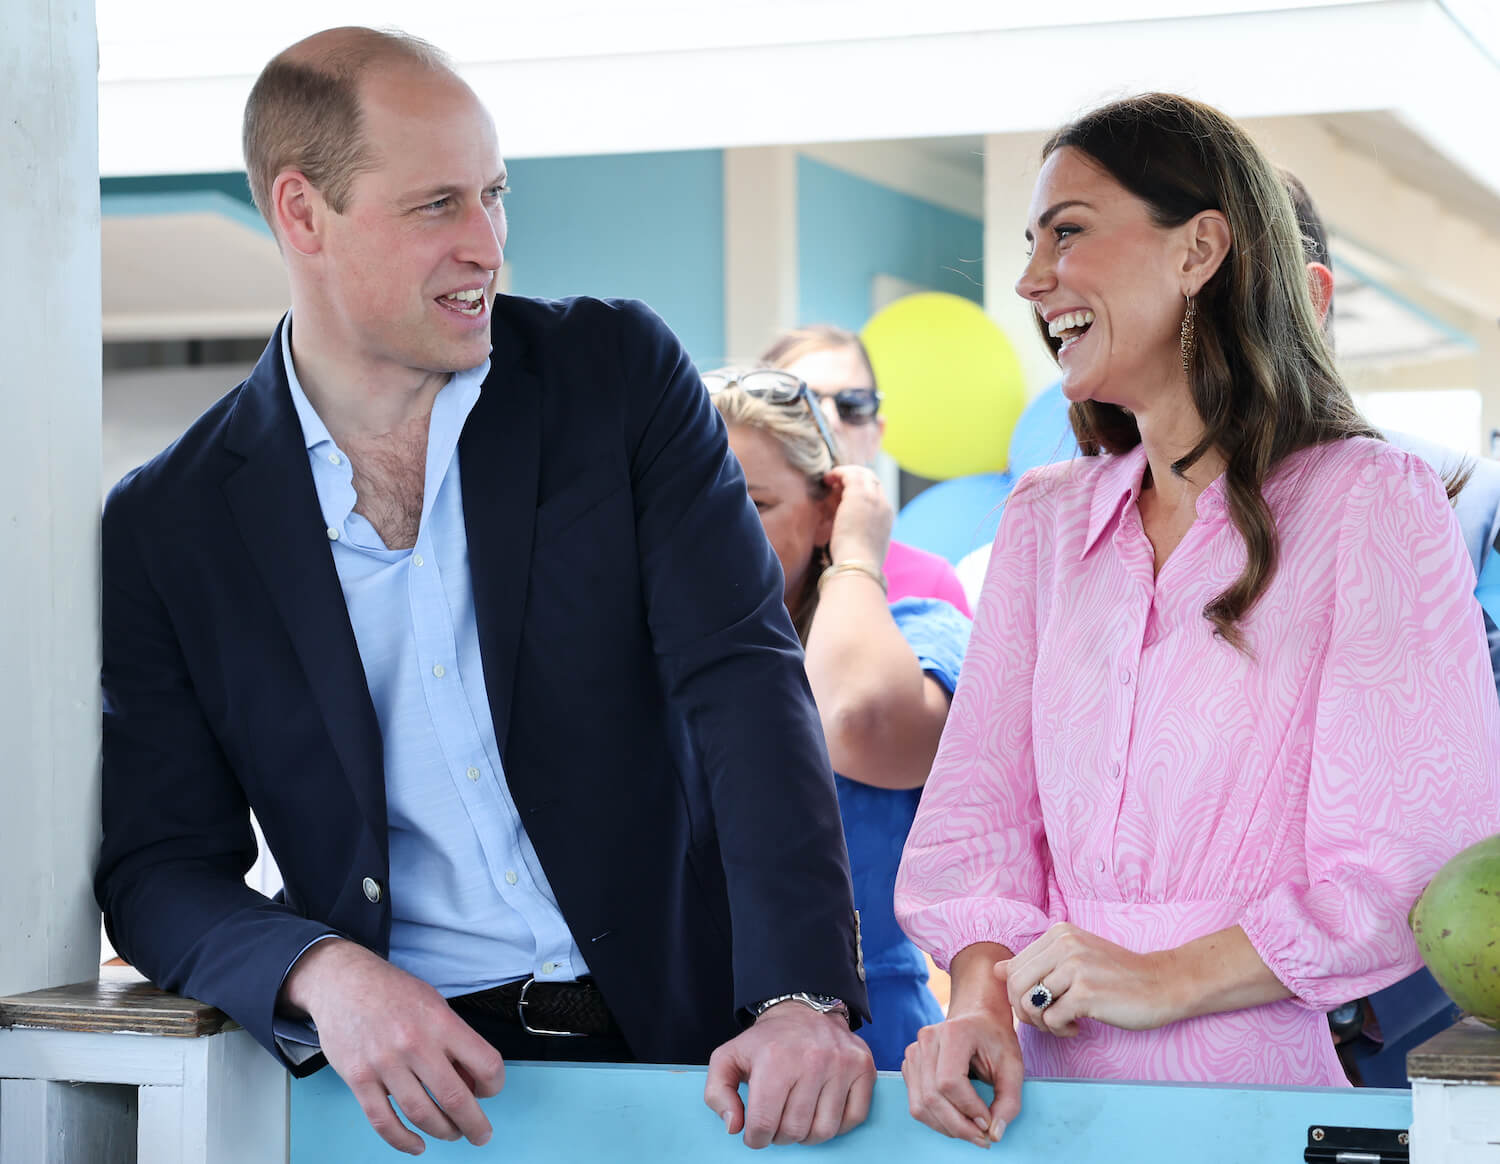 Prince William looks at Kate Middleton, dressed in a pink shirt and smiling